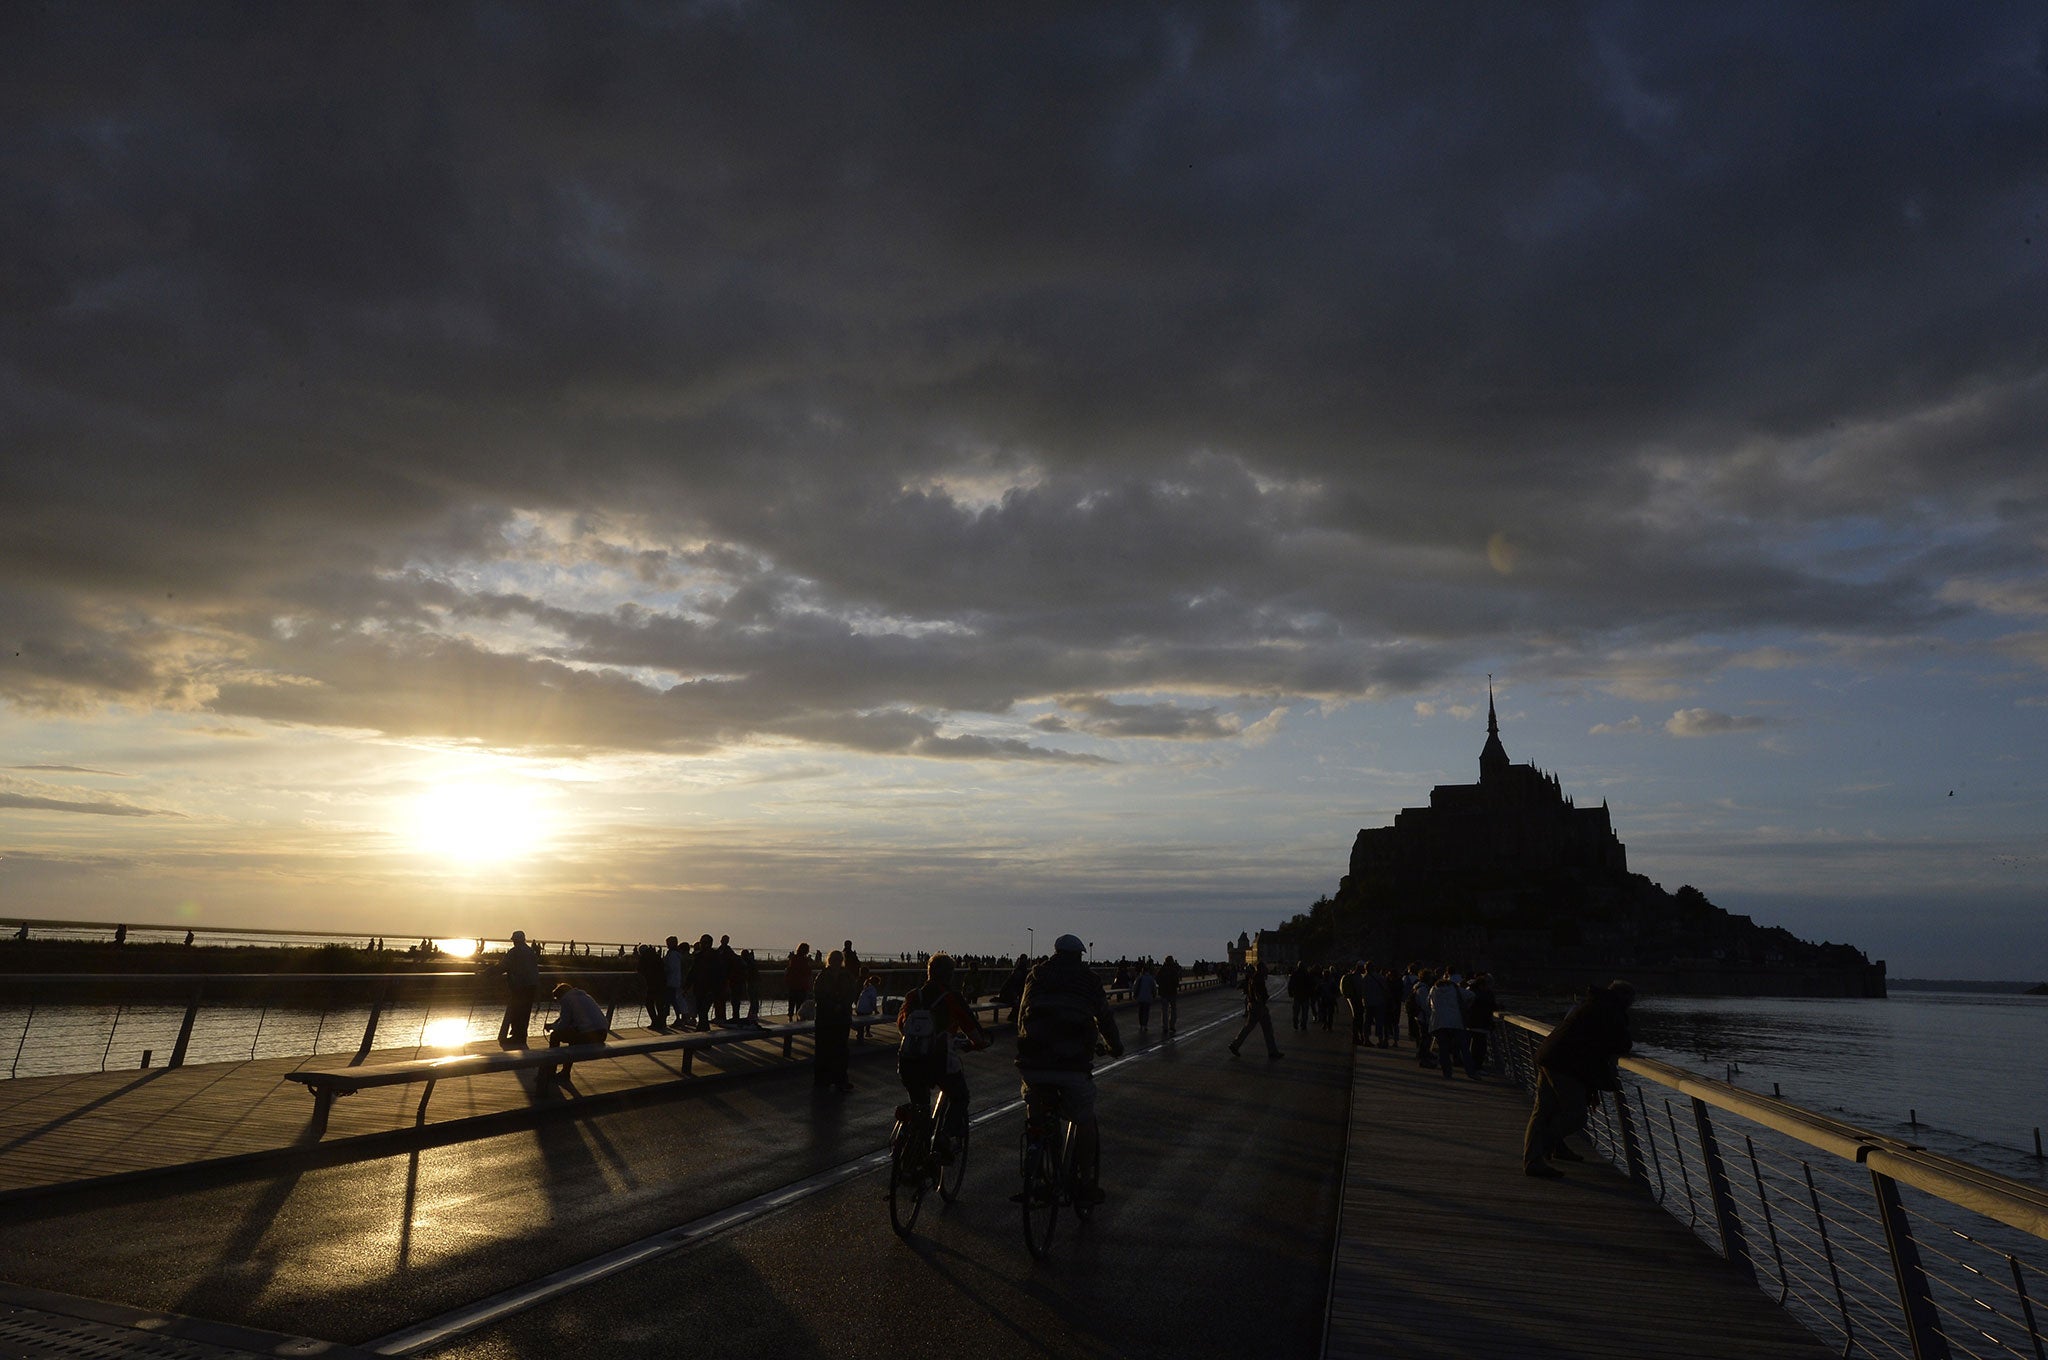 After 1,300 years, there’s a bridge to Mont Saint-Michel